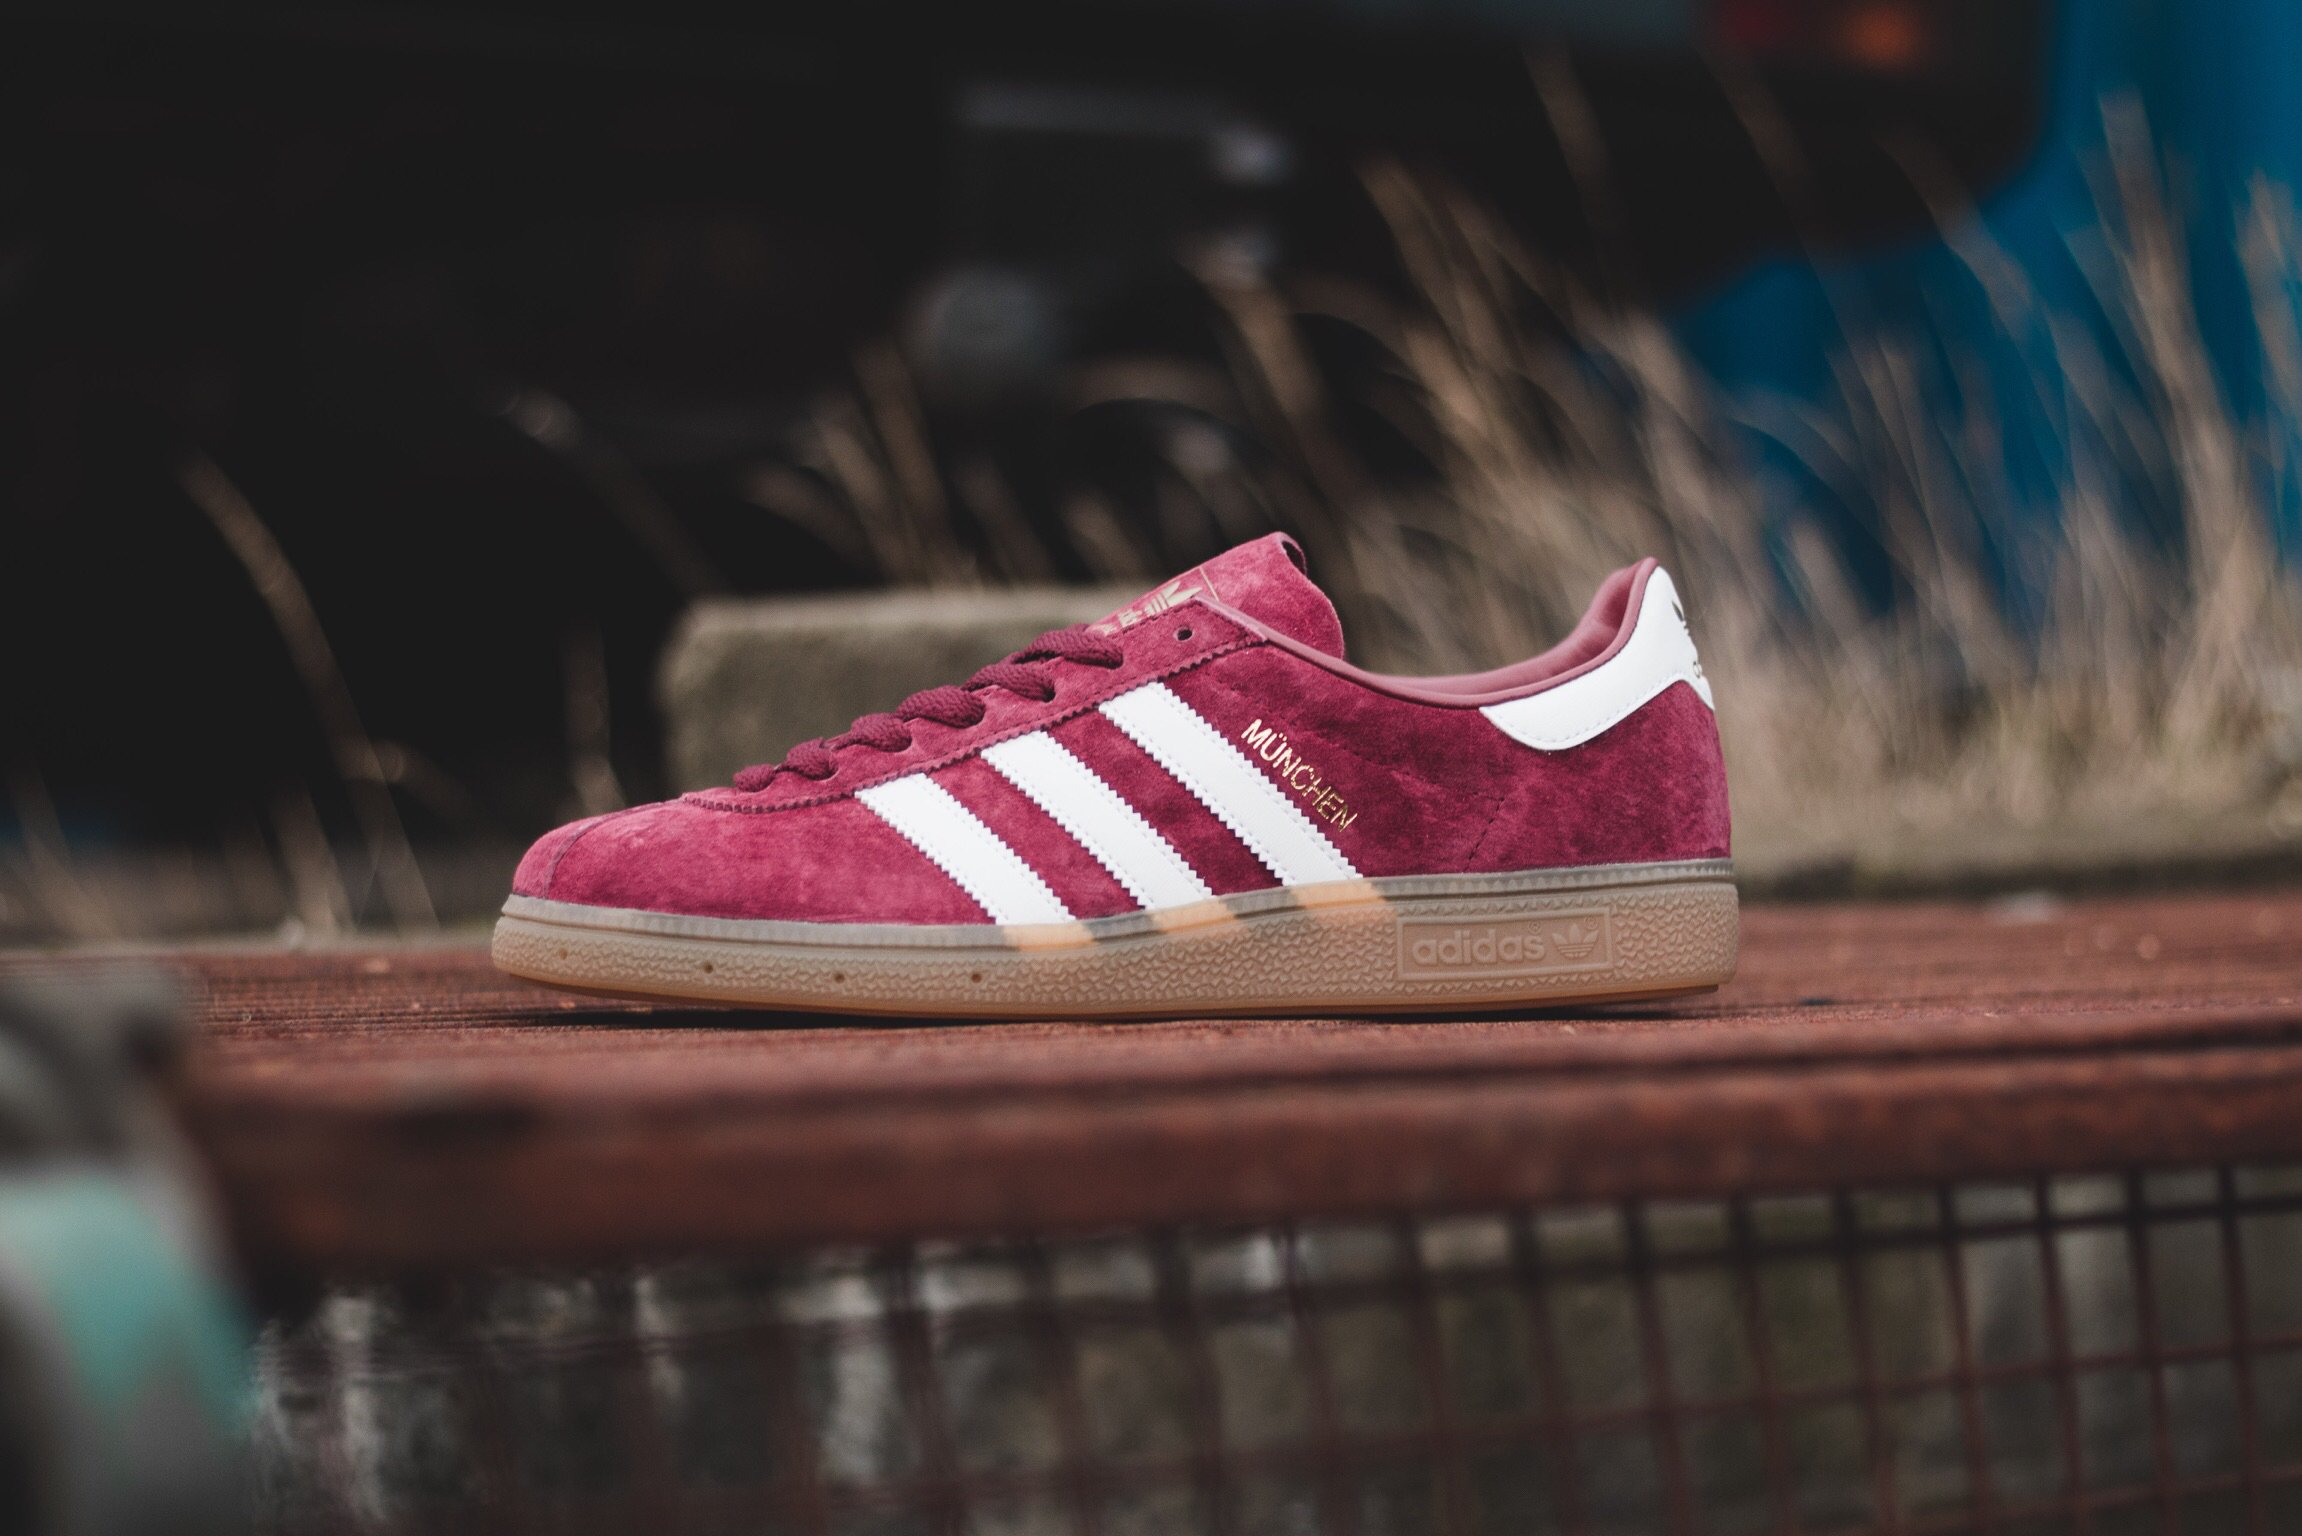 appel Vul in huisvrouw HANON on Twitter: "adidas Munchen “Burgundy” is available to buy ONLINE  now! #hanon #adidas #munchen https://t.co/kU6AigS00W  https://t.co/cEHZNsYMGN" / Twitter